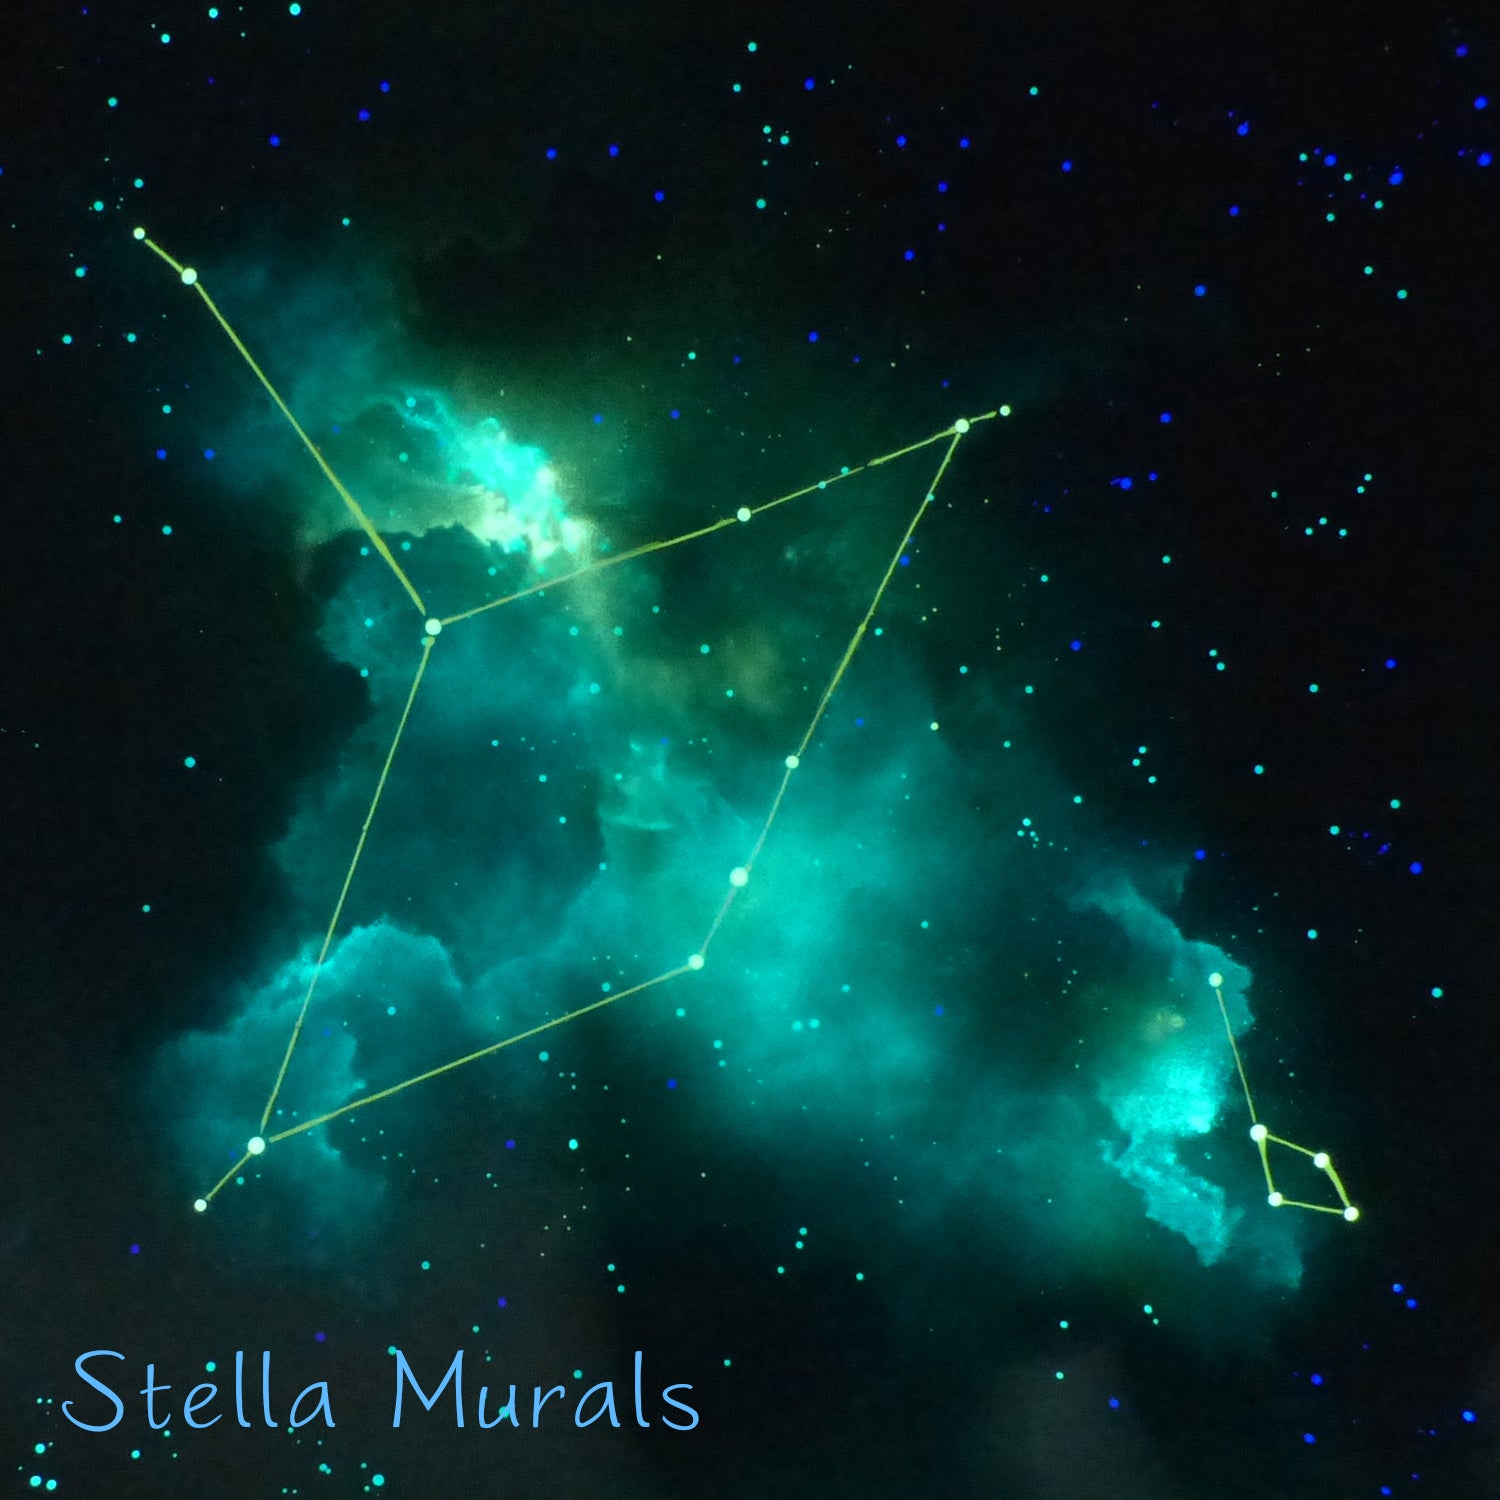 Aquila constellation glow in the dark made and designed in new zealand